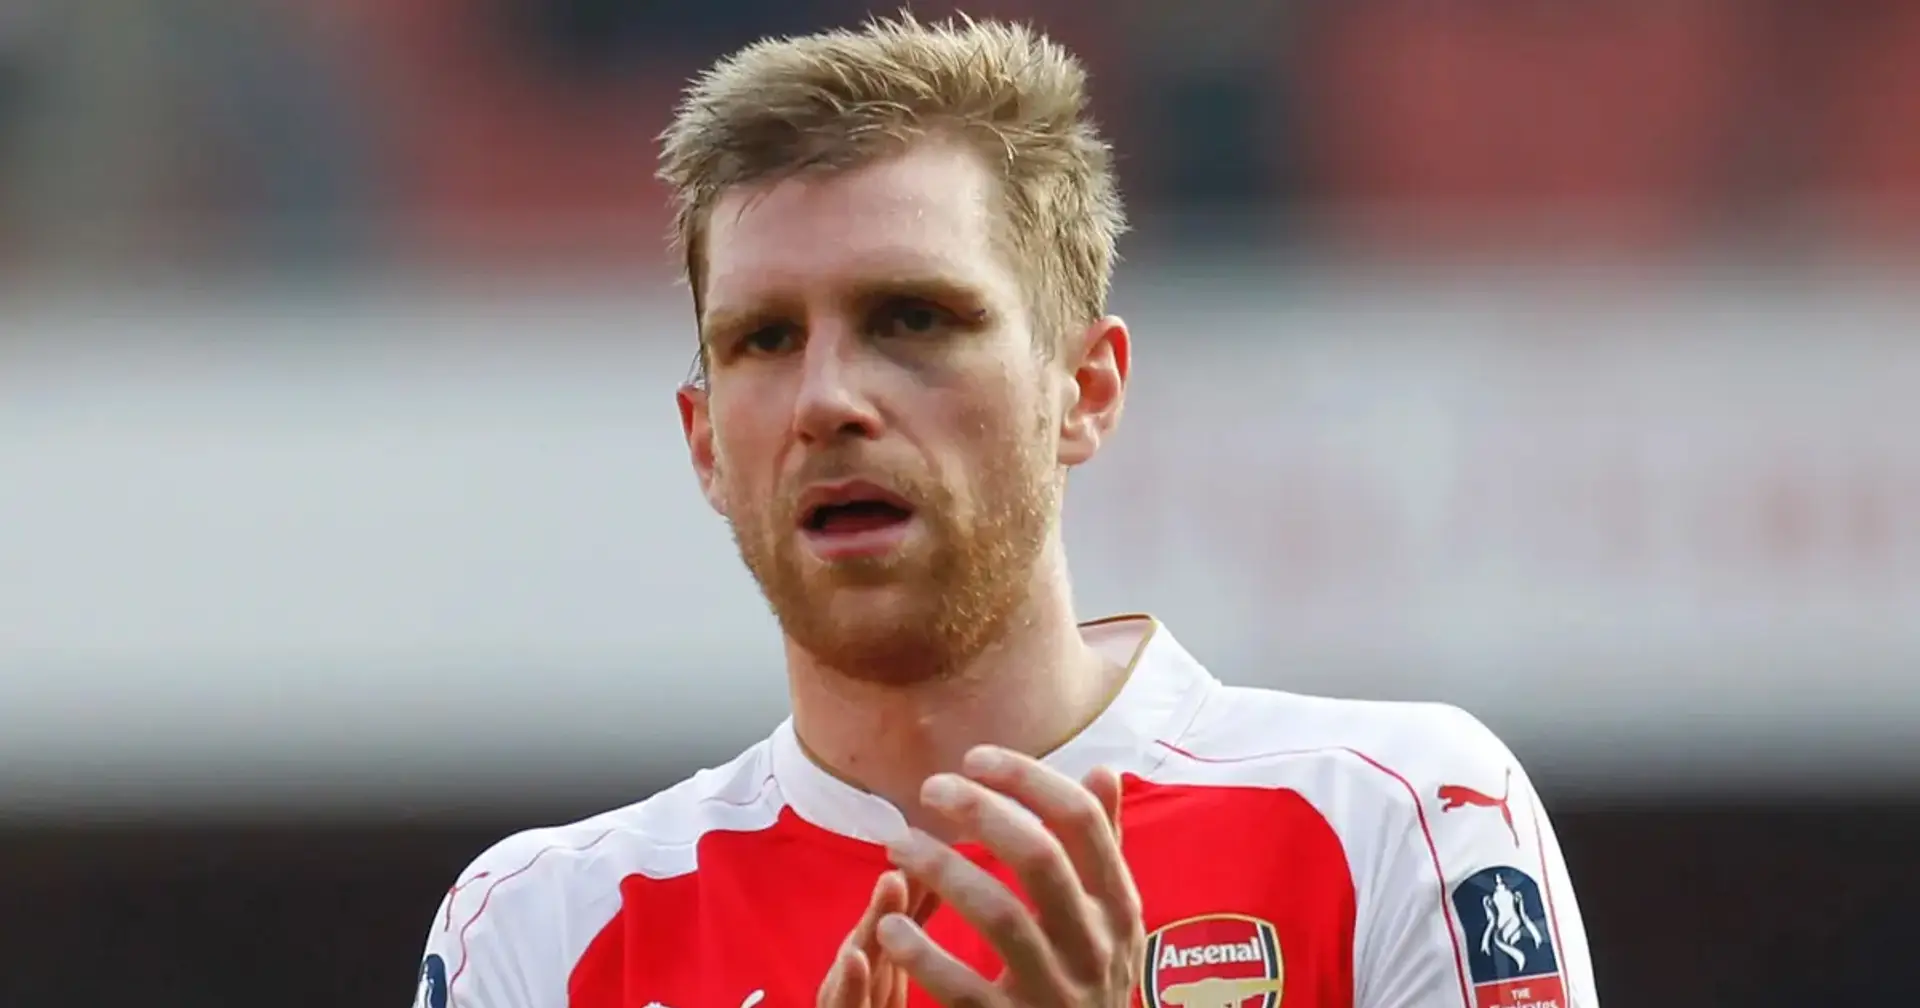 Per Mertesacker opens up on what it takes to be Arsenal's captain